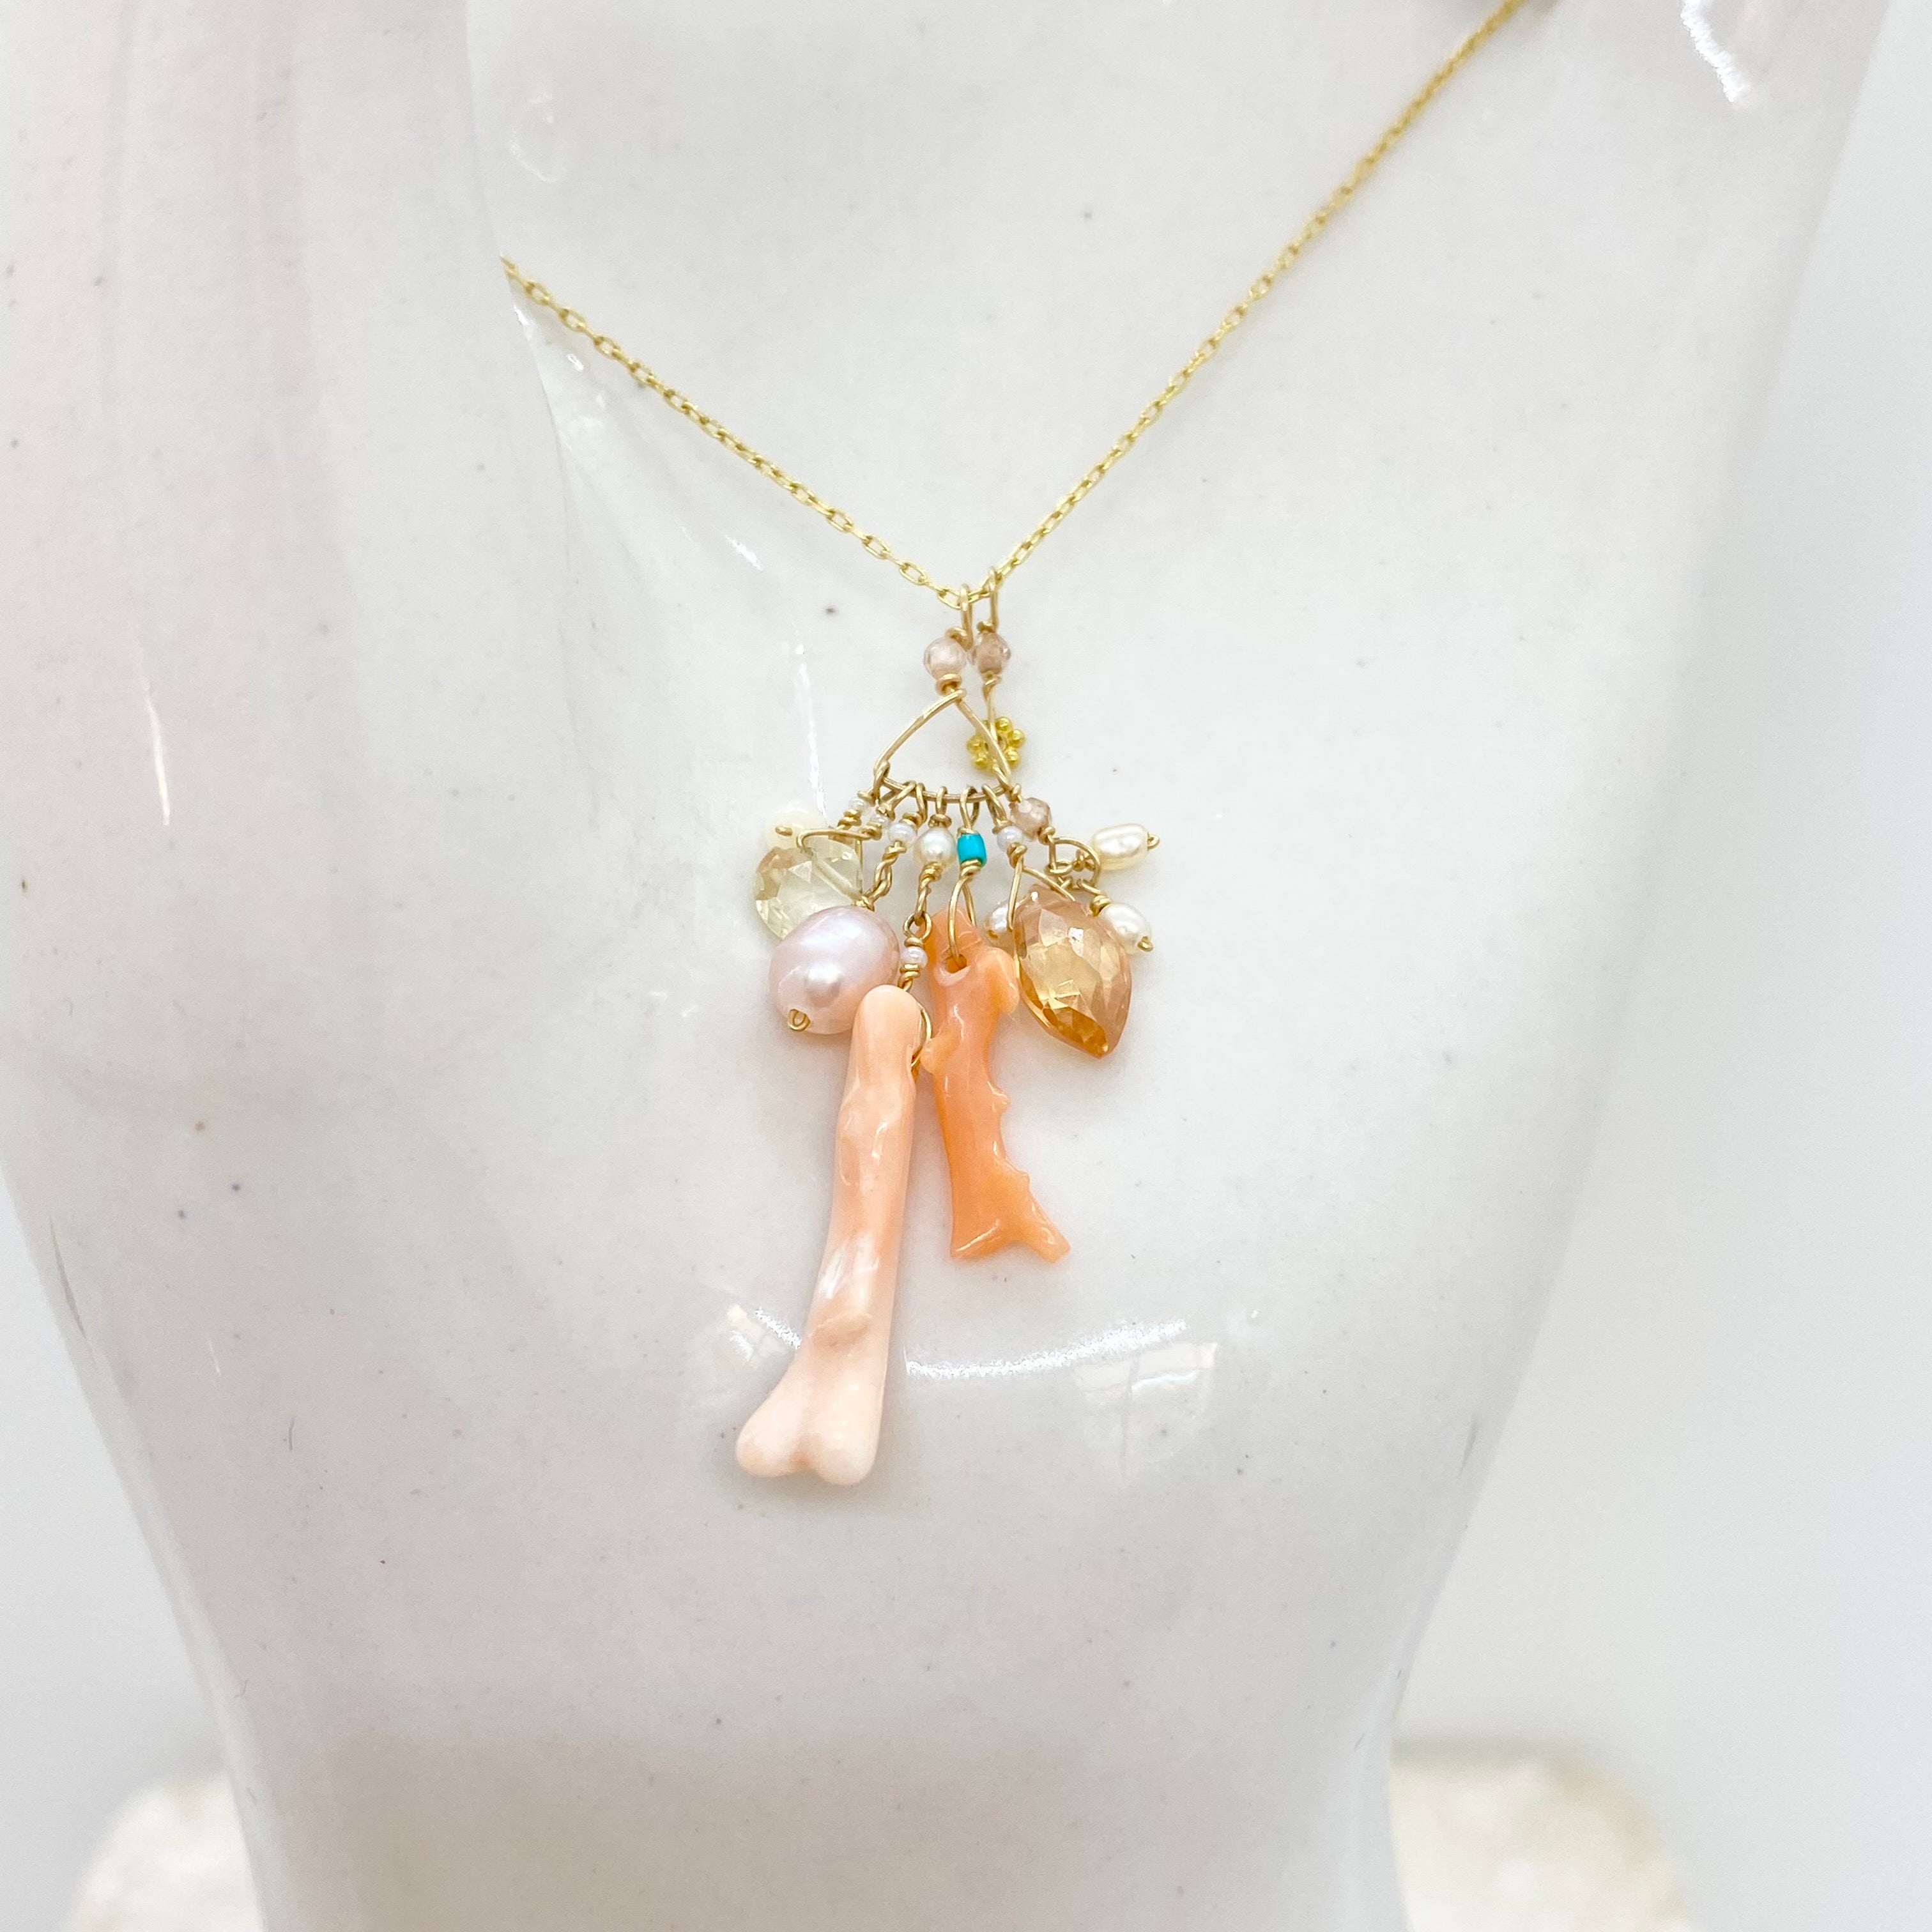 14k Gold Chain Necklace w/ 18k Gold Daisy, Coral, Freshwater Pearls, Cubic Zirconia, Quartz, Opal & Antique Italian Beads